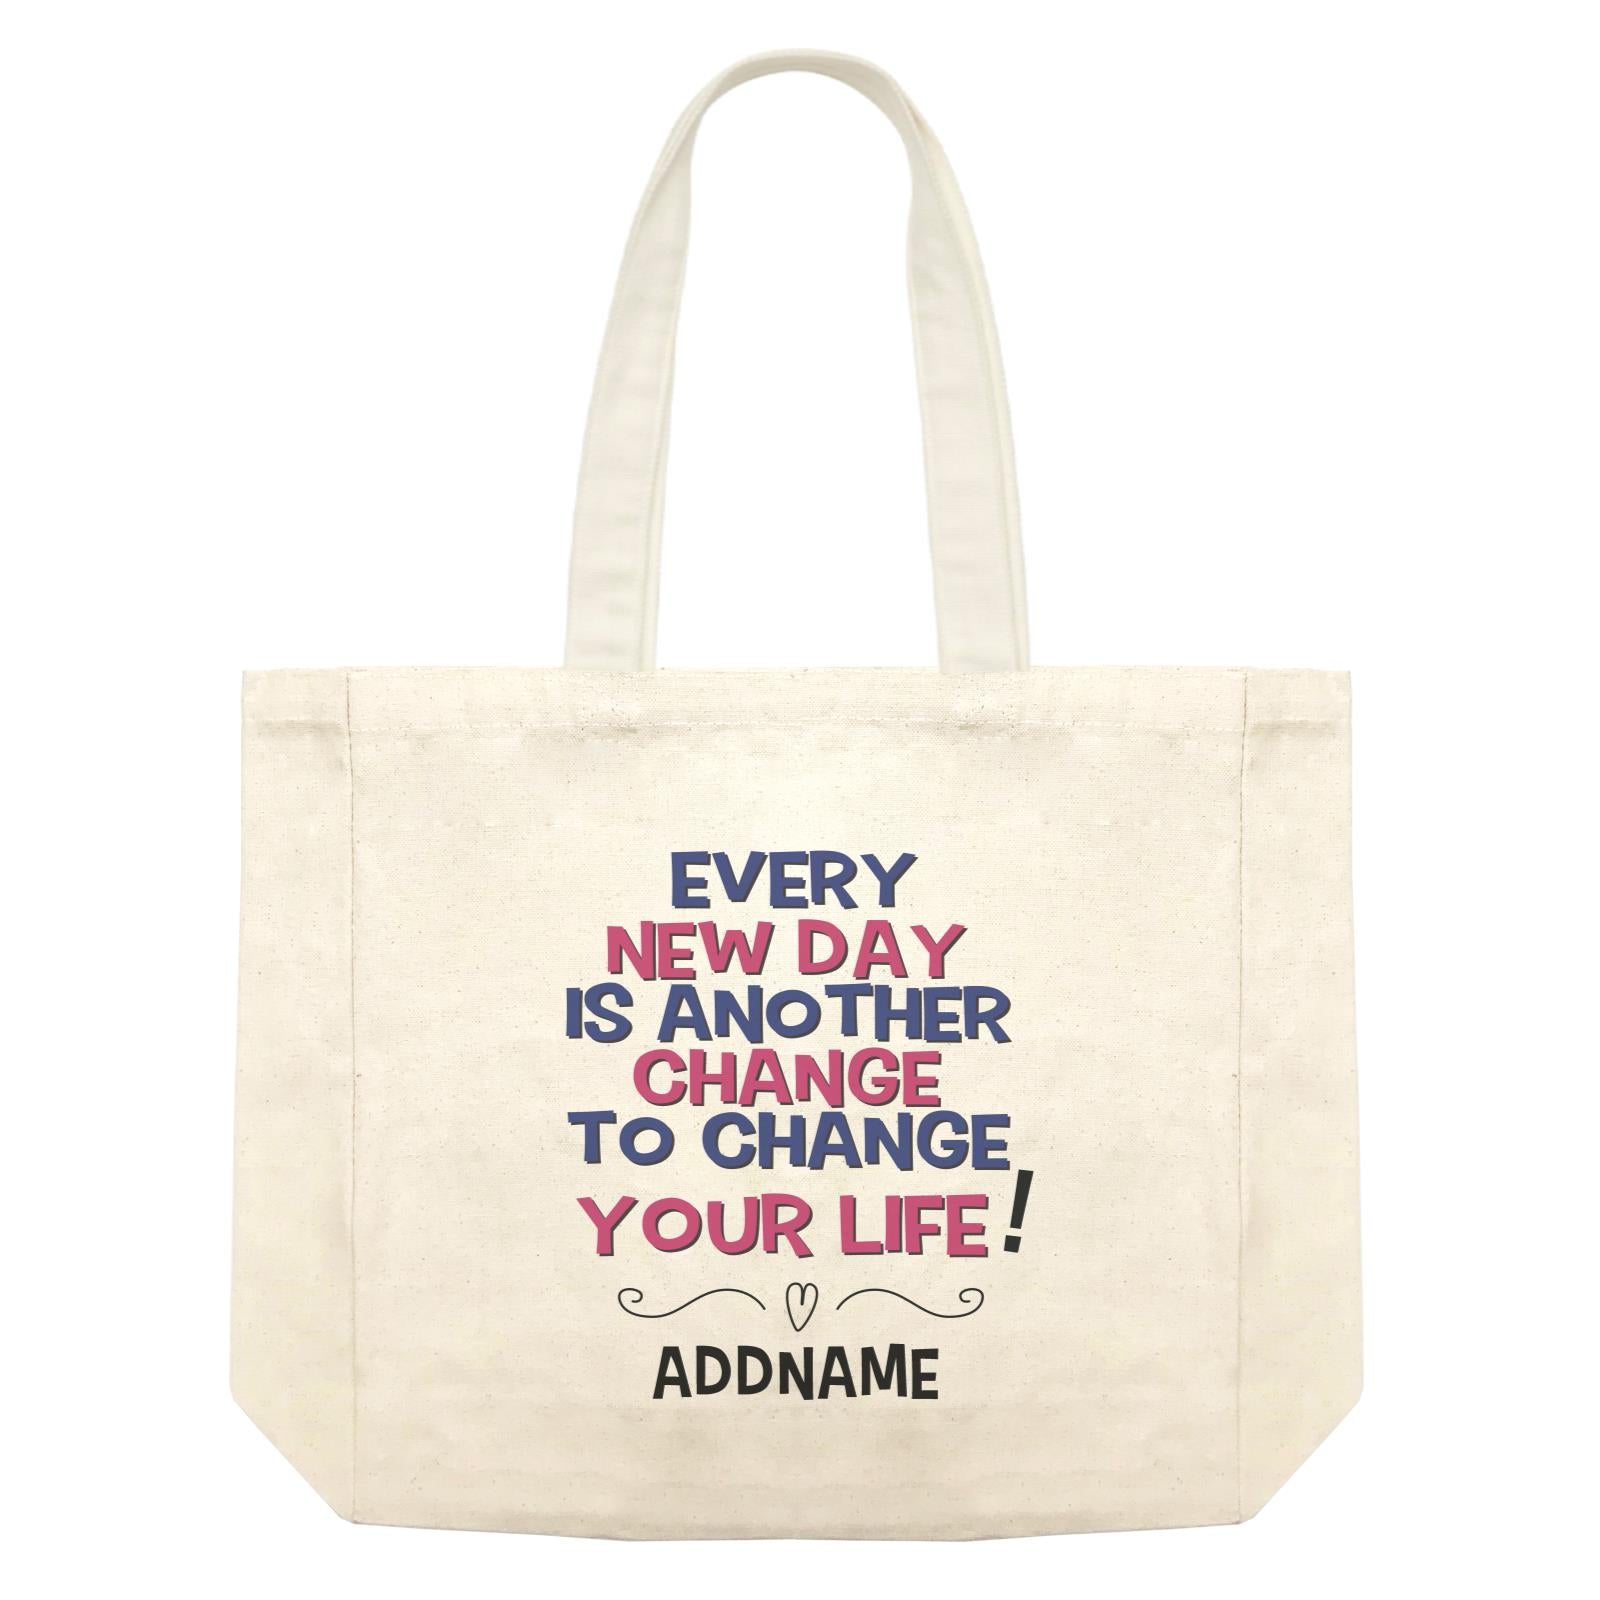 Inspiration Quotes Every New Day Is Another Chance To Change Your Life Addname Shopping Bag